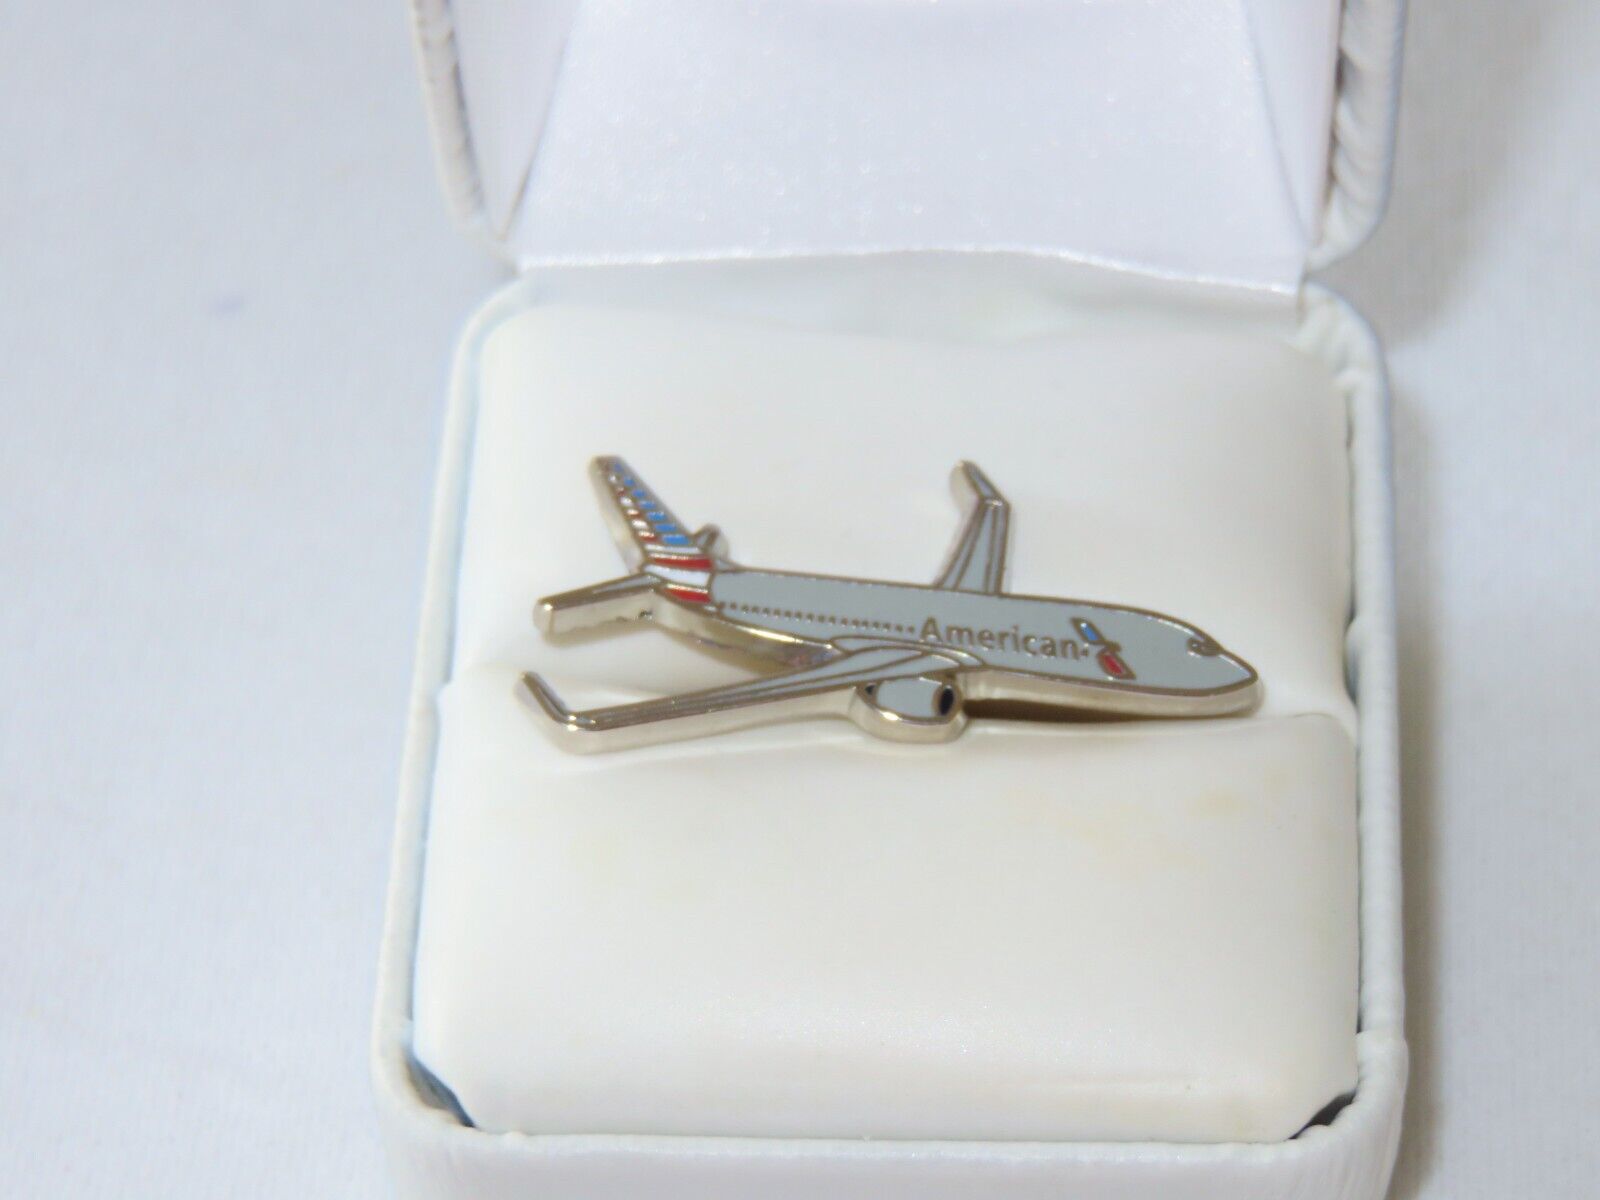 AMERICAN AIRLINES BOEING 737 AIRPLANE LAPEL TACK PIN AA PILOT GIFT COLLECTIBLE